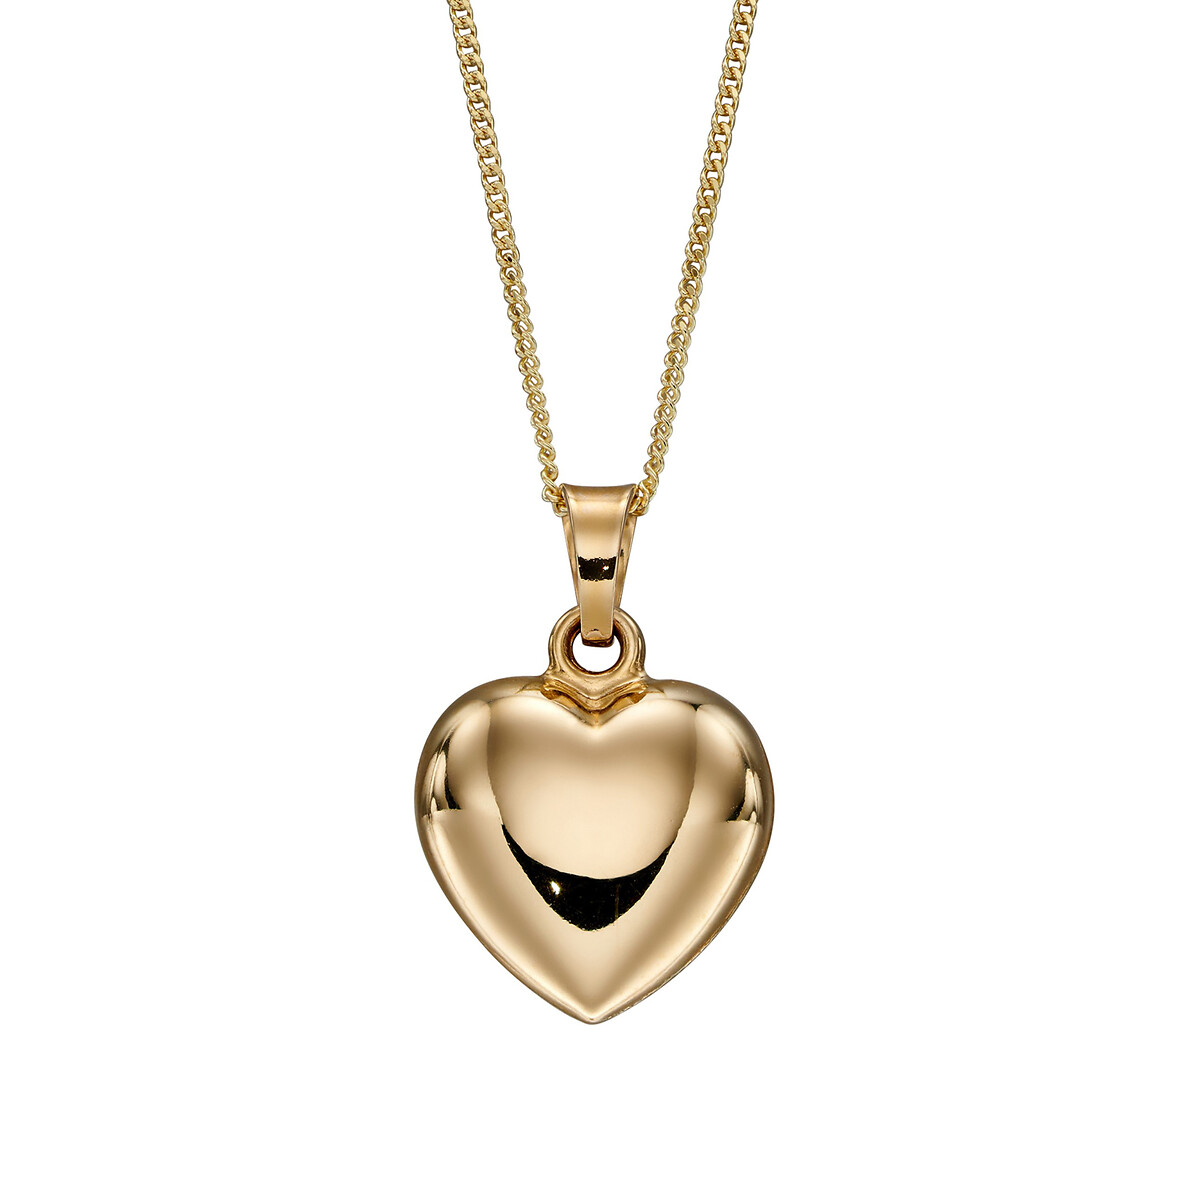 Buy Revere 9ct Gold Floating Heart Pendant Necklace | Womens necklaces |  Argos